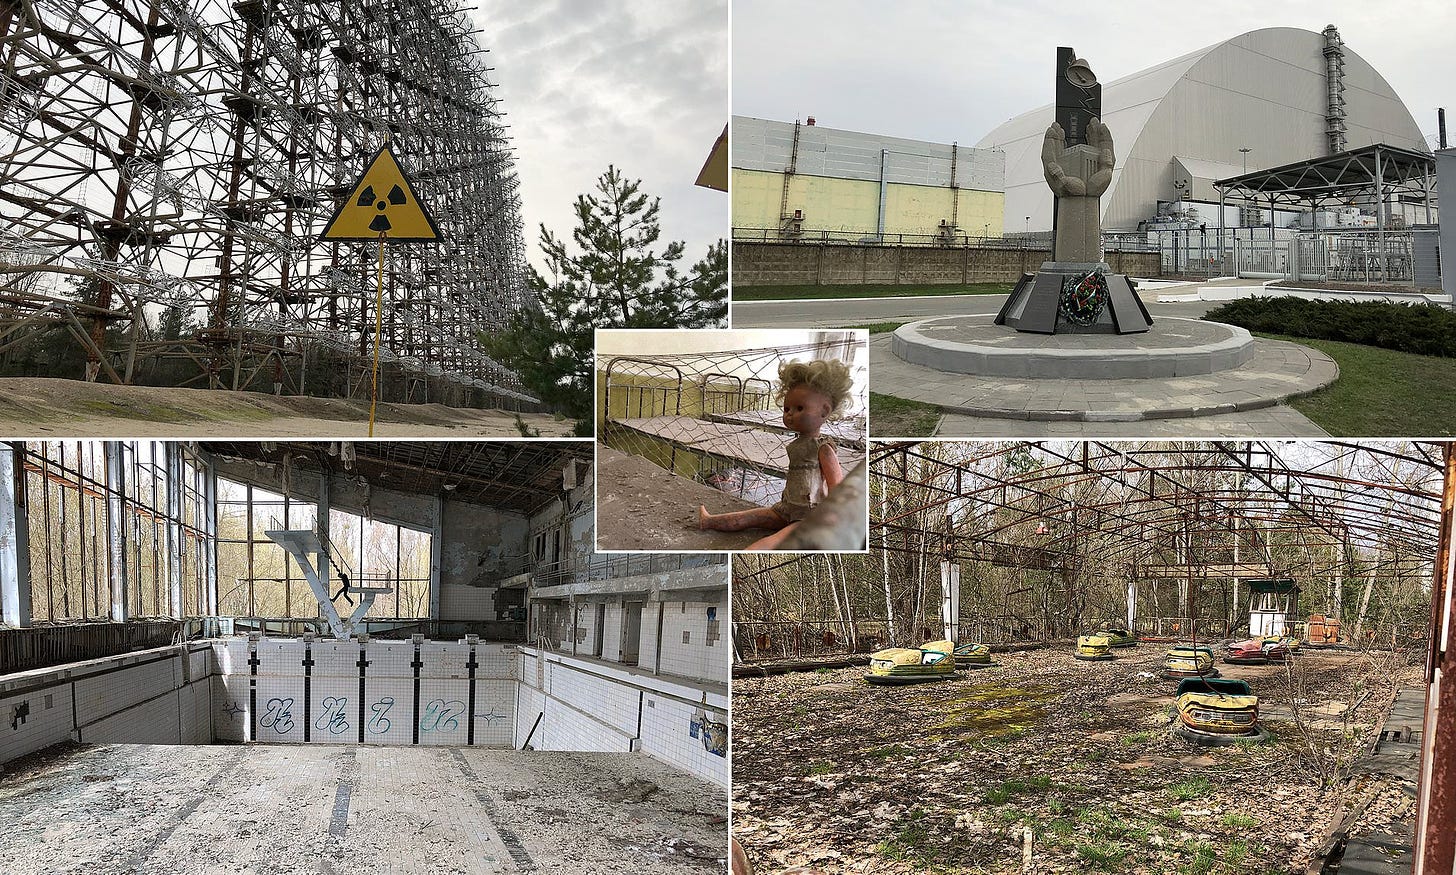 Chernobyl photos show nuclear disaster exclusion zone 30 years on | Daily  Mail Online